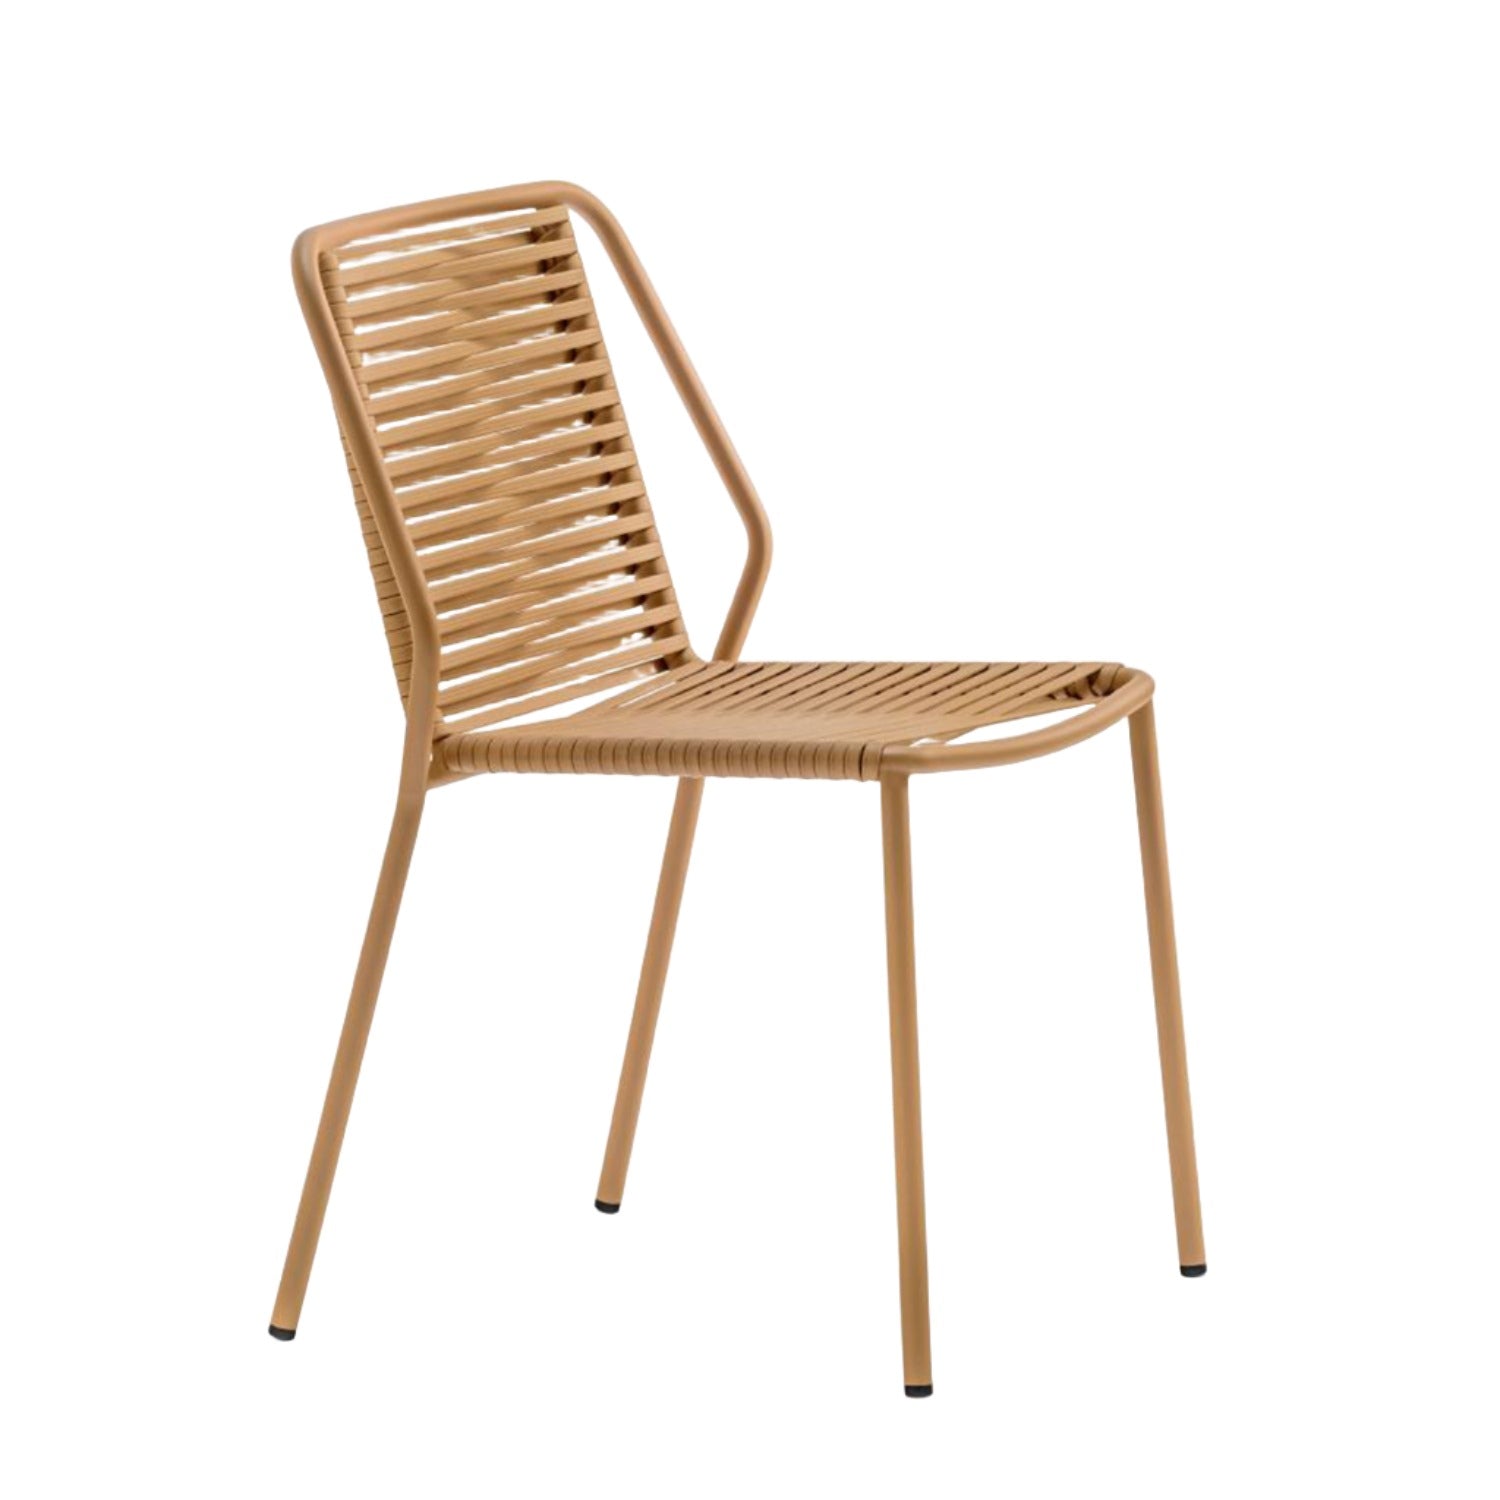 Pedrali Philia 3900 Outdoor Dining Chair in beige